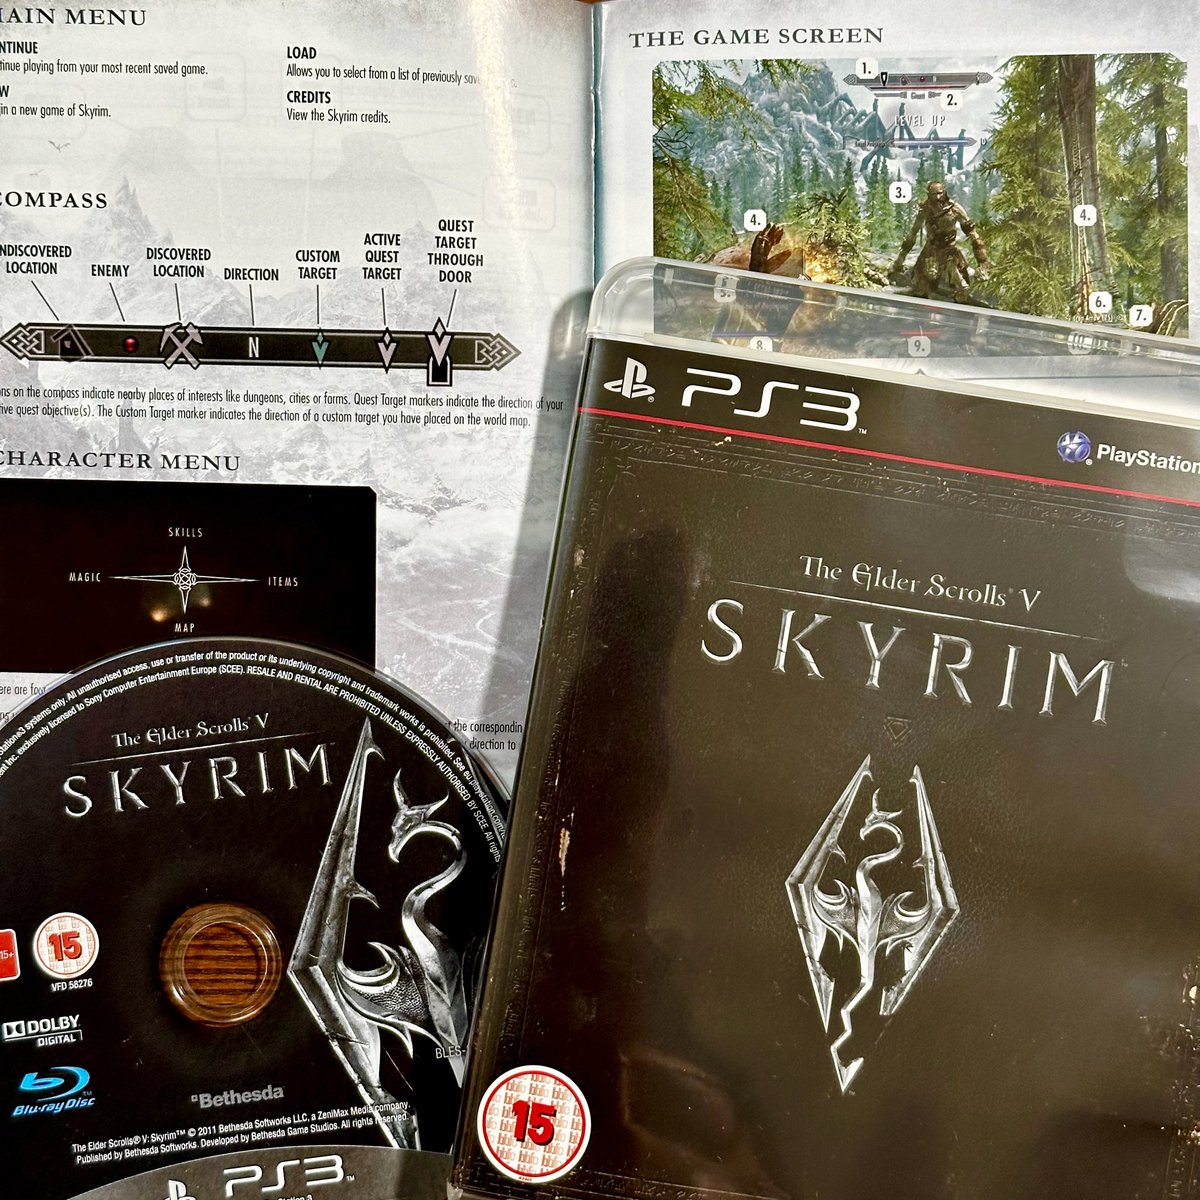 What’s the first thing that comes to mind when you see The Elder Scrolls V: Skyrim? 🤔